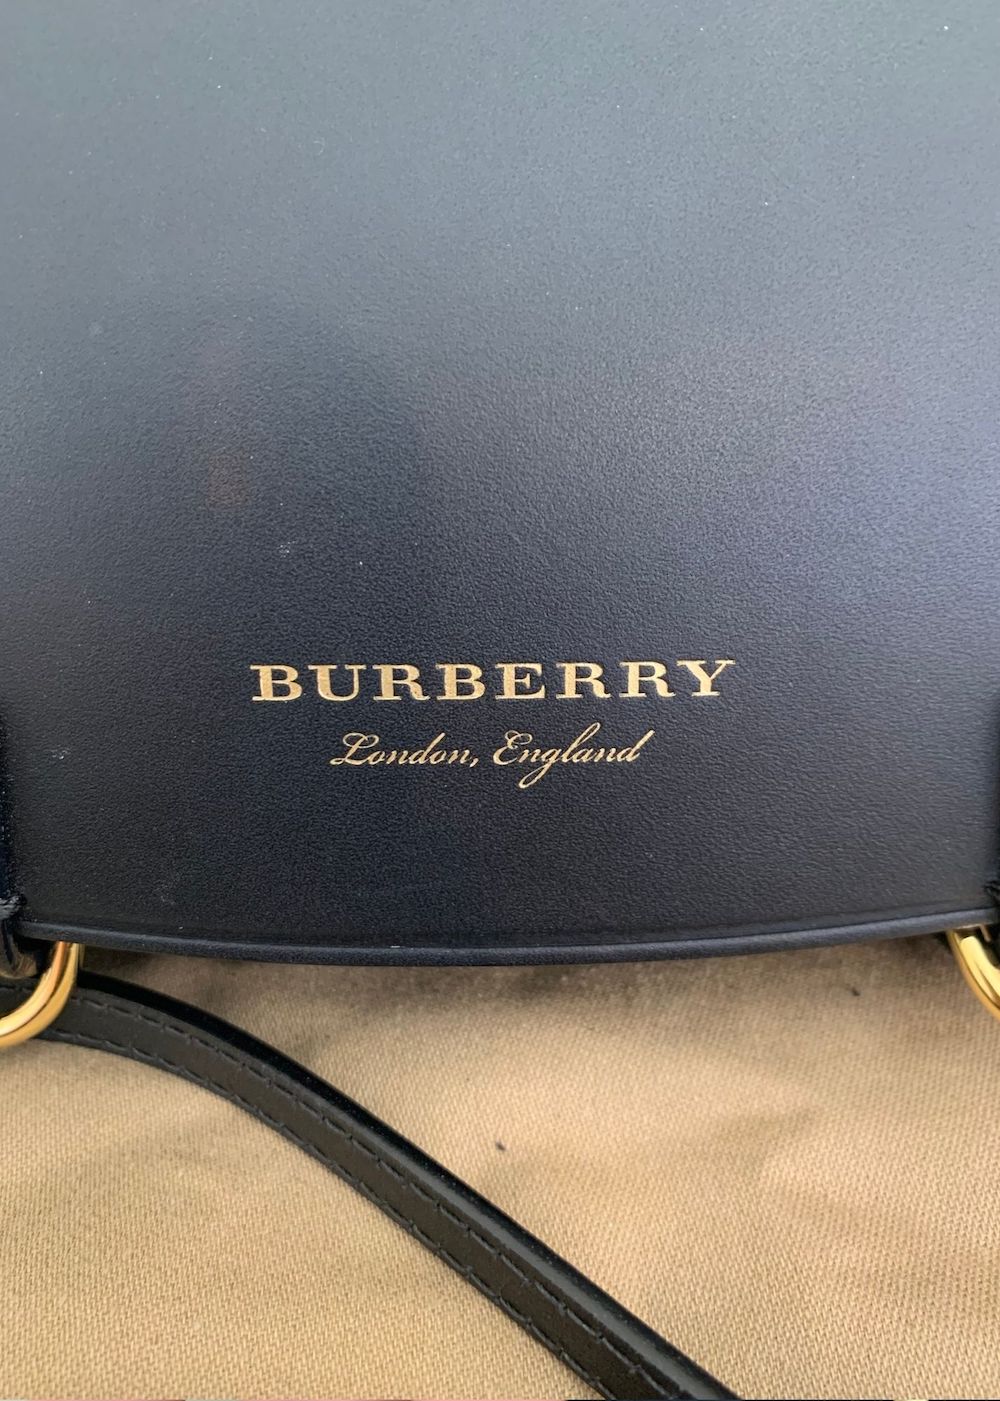 Burberry Bridle Saddle Bag Leather and Haymarket Check Coated Canvas Baby